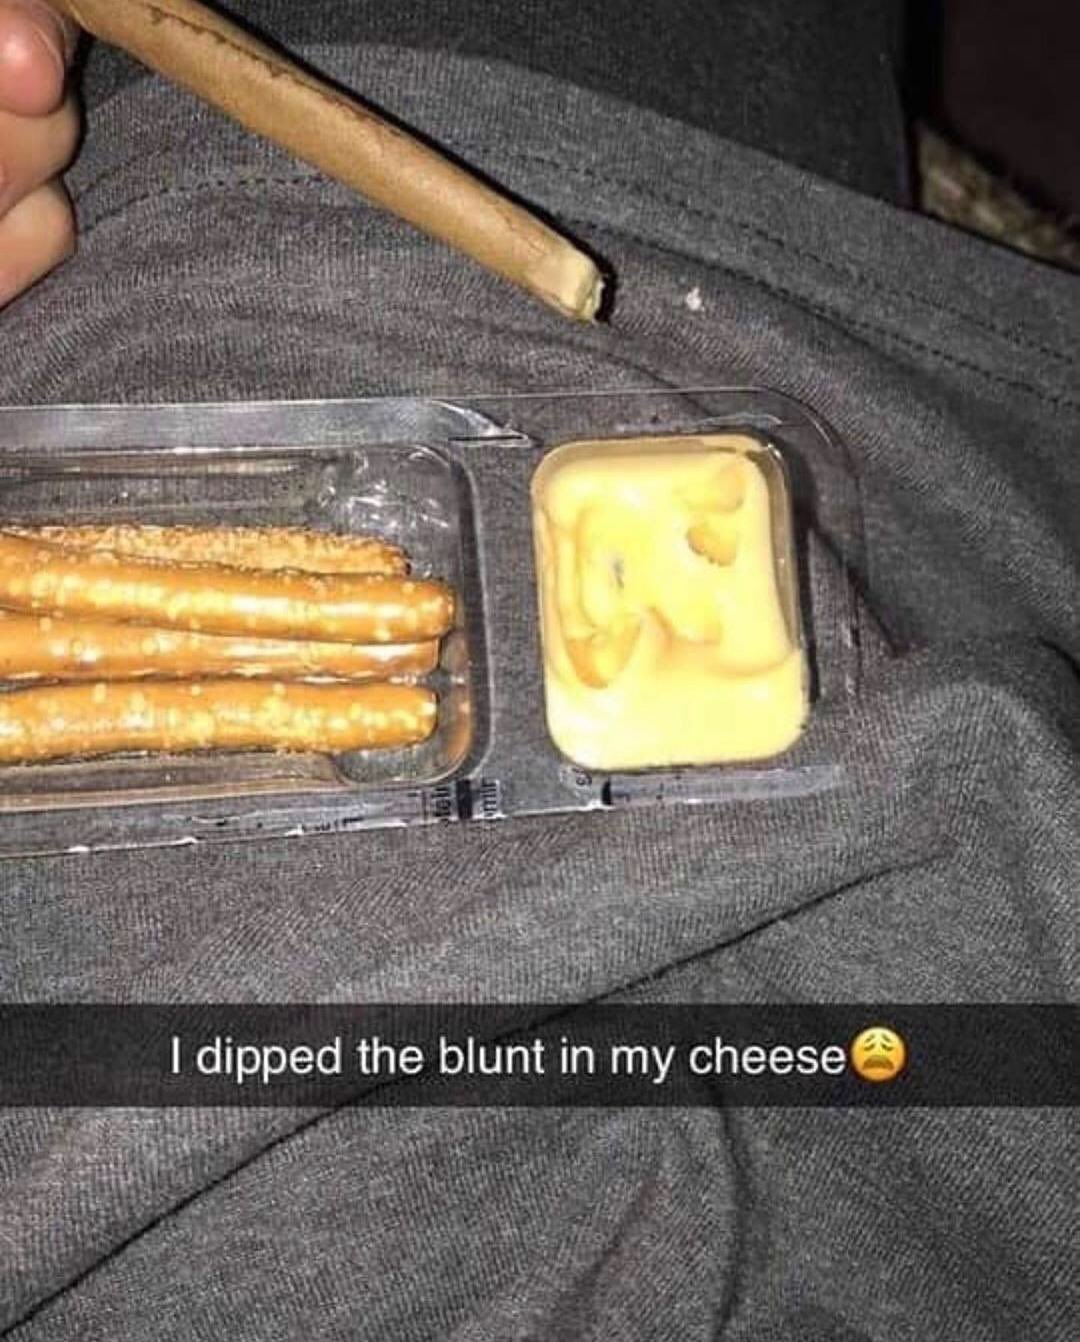 420 - worst joints ever - dipped my blunt in the cheese - I dipped the blunt in my cheese